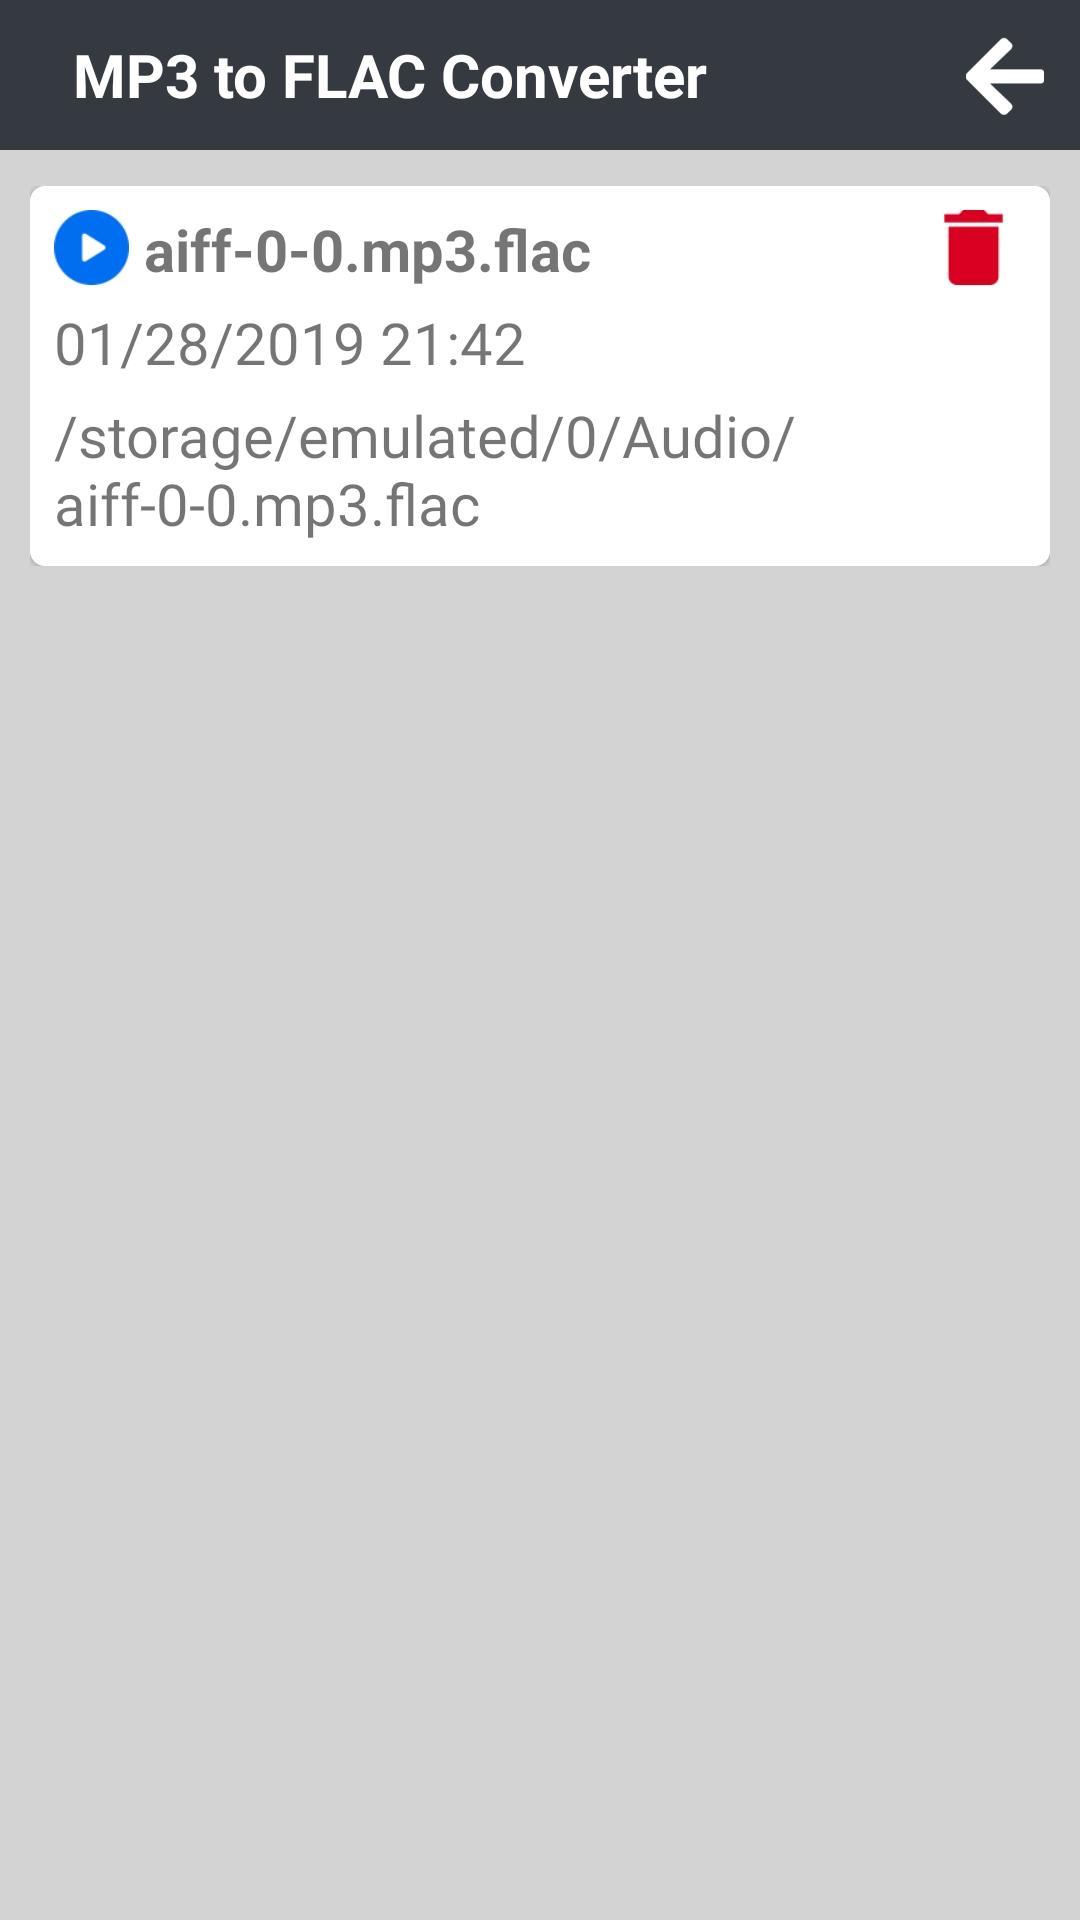 MP3 to FLAC Converter for Android - APK Download